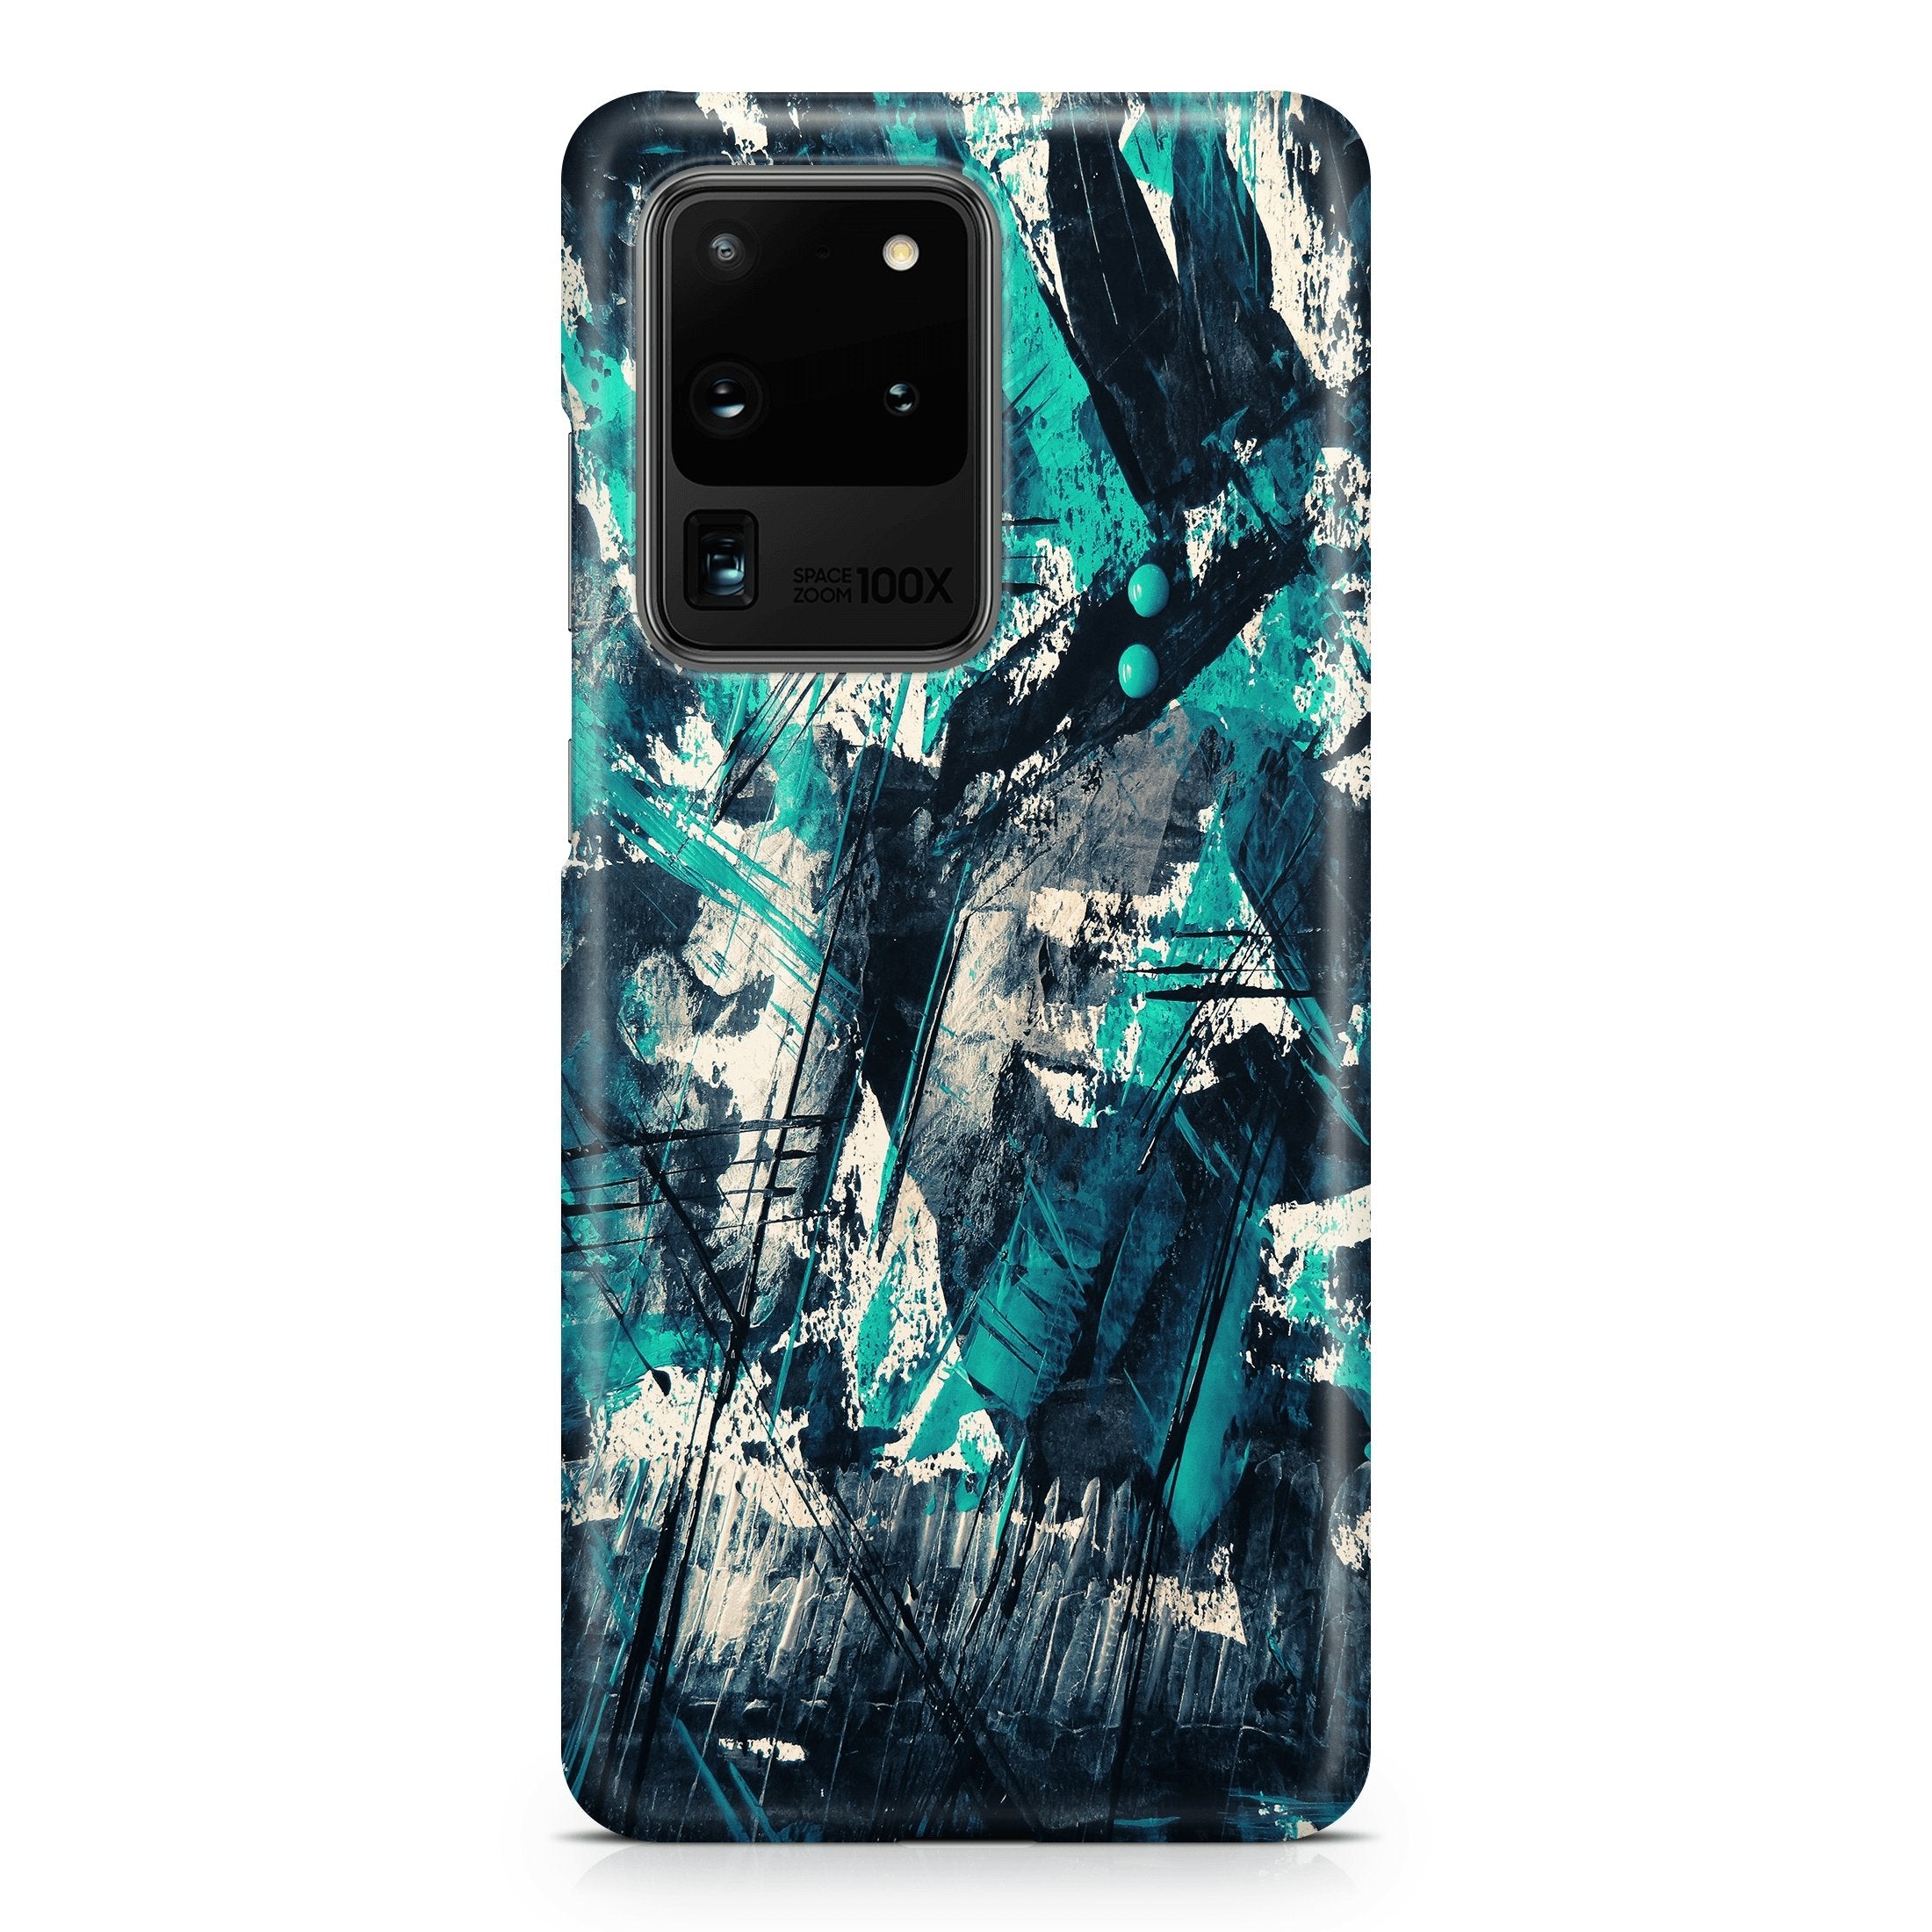 Blue Chaos - Samsung phone case designs by CaseSwagger